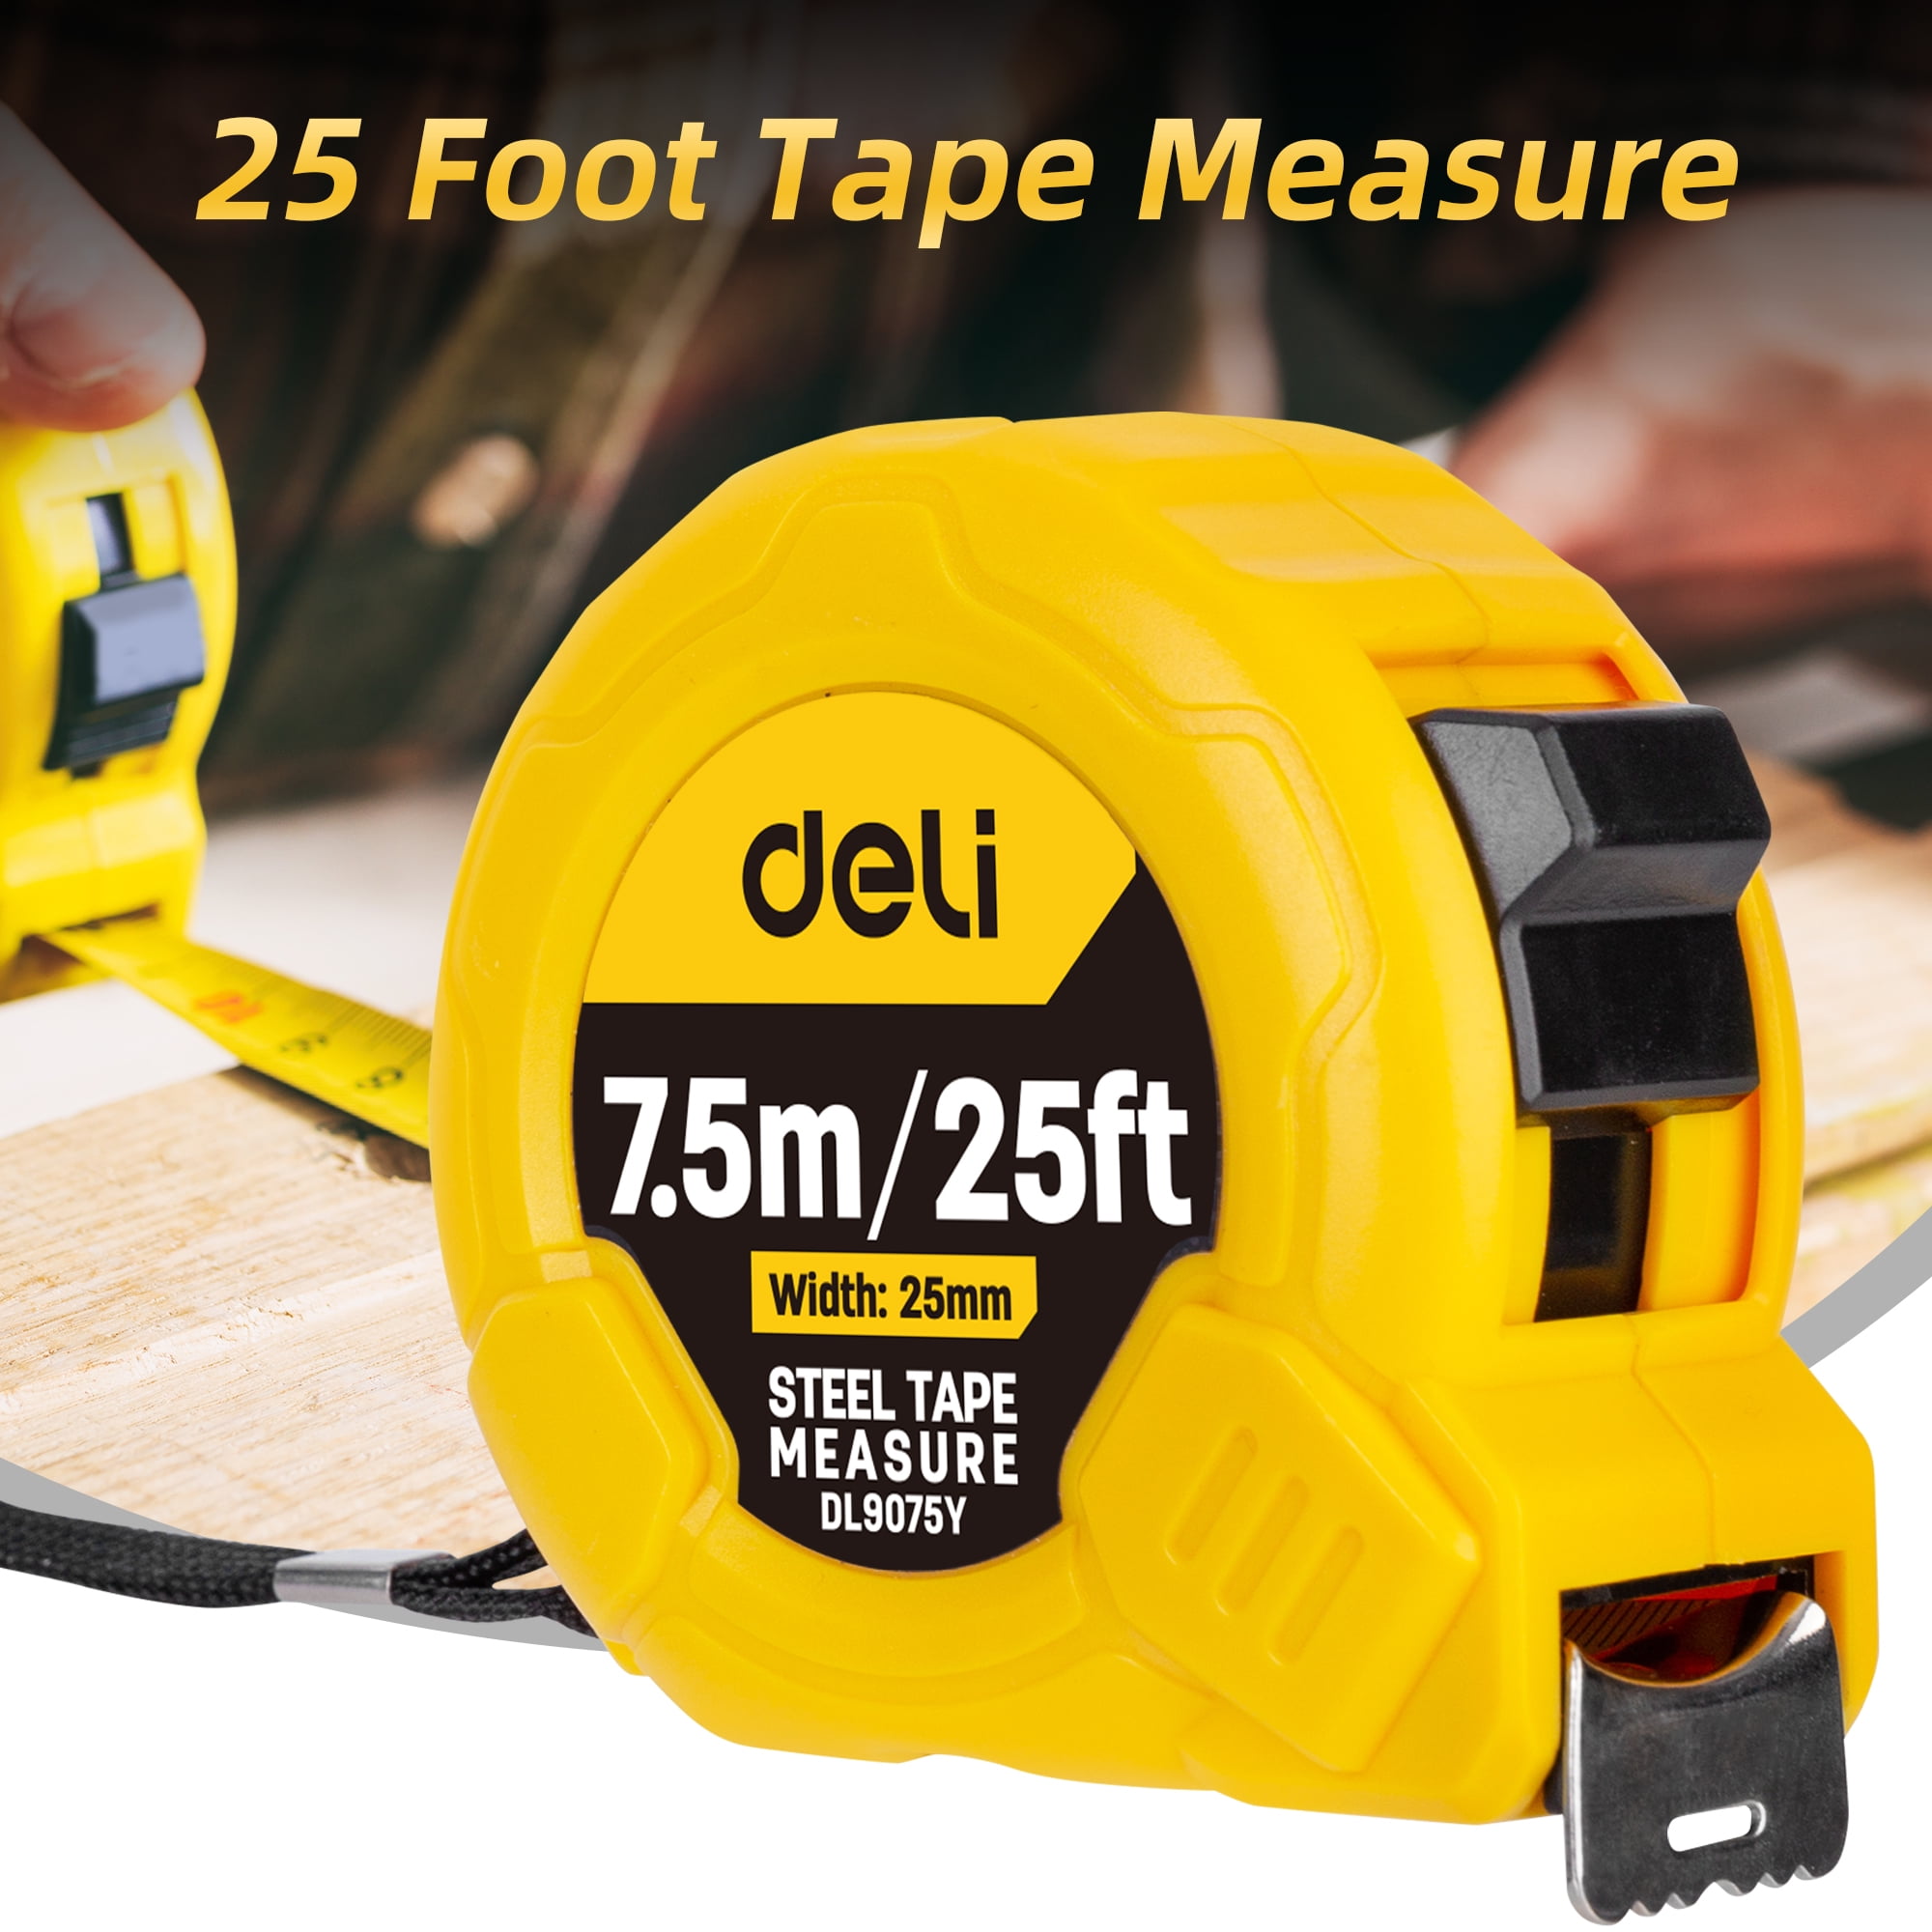 Project Source 25-ft long Imperial and Metric Tape Measure 66113